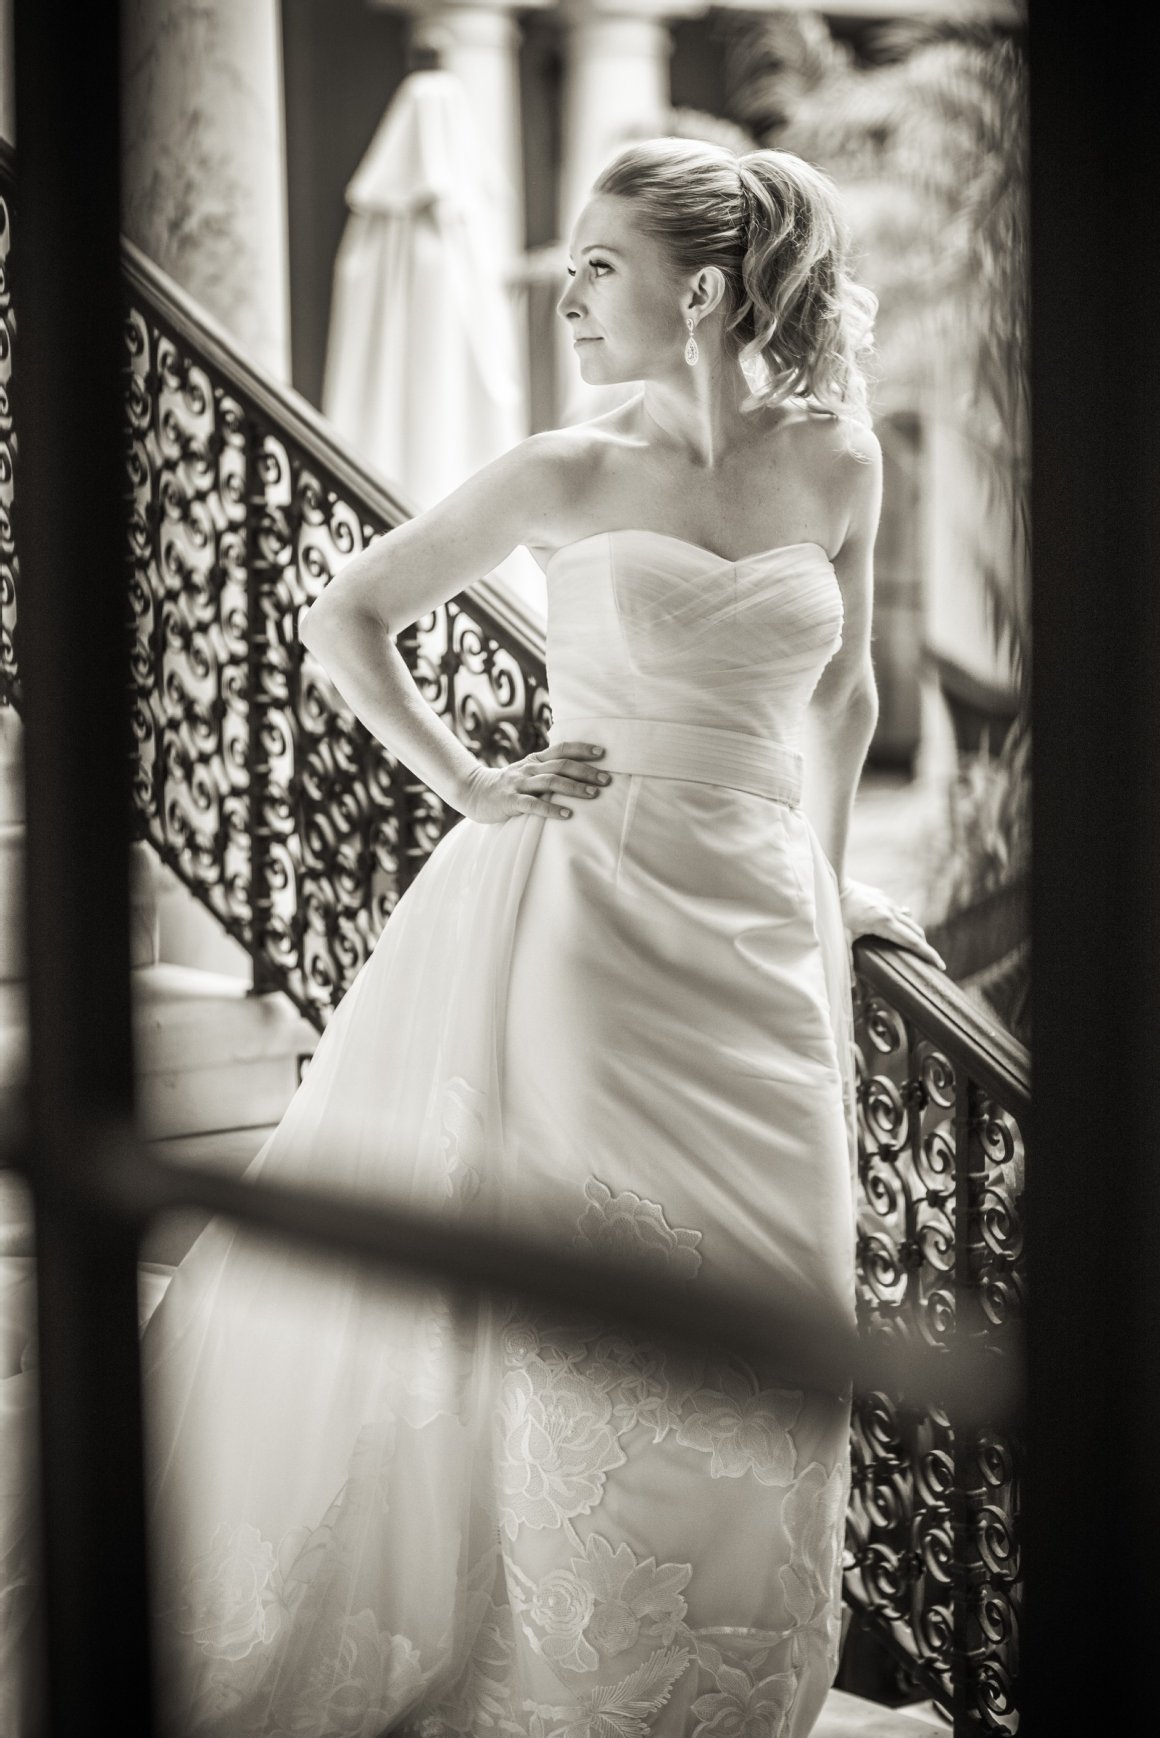 Wedding at Glenmere Mansion - Photography by Christian Oth Studio